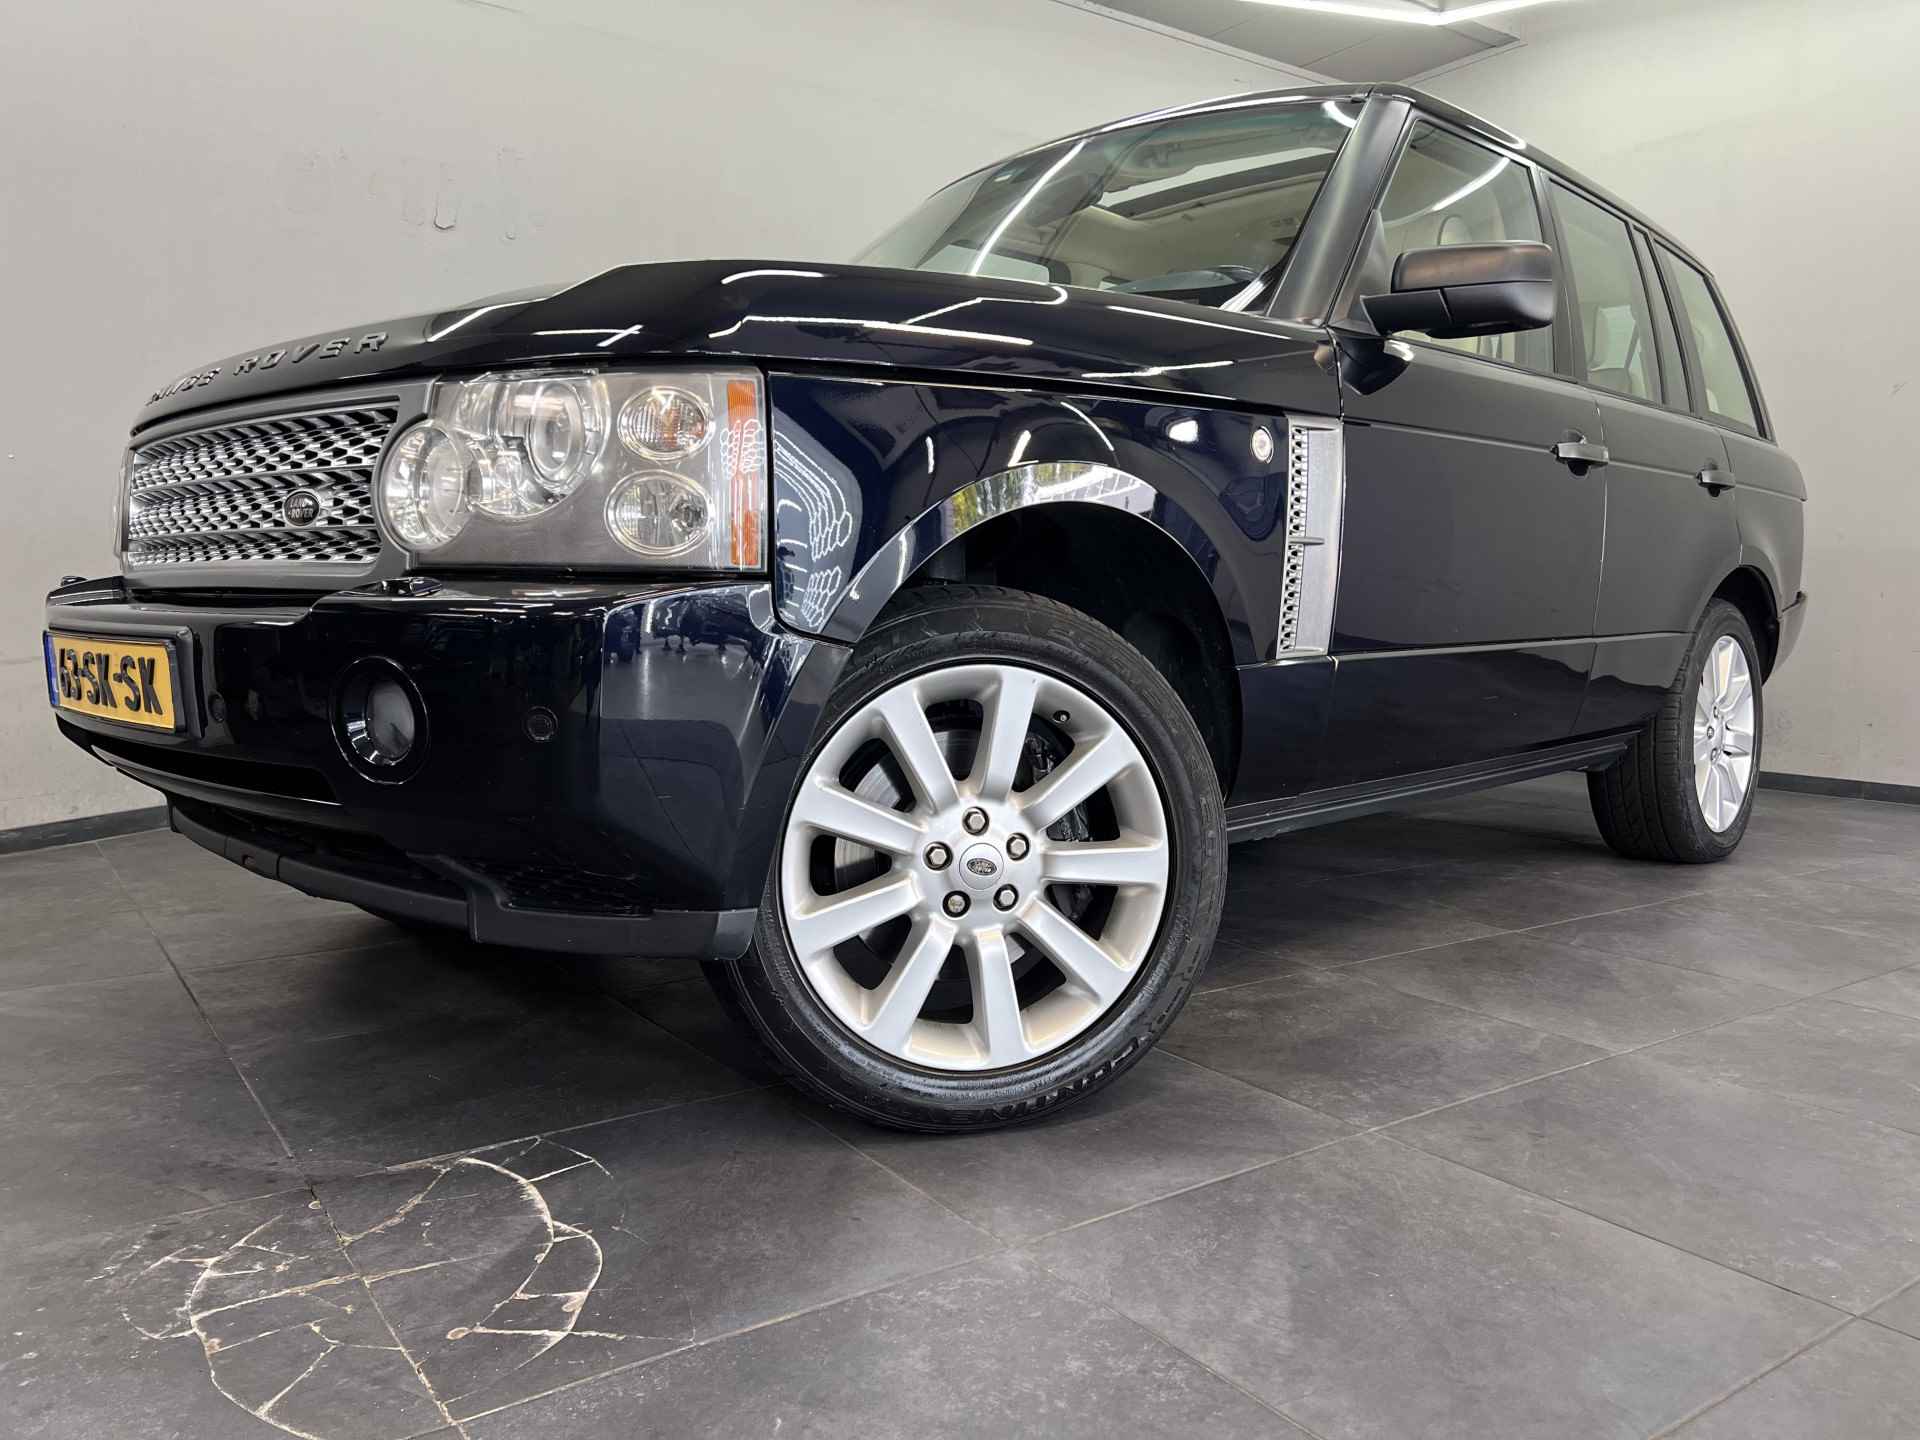 Land Rover Range Rover 4.2 V8 Supercharged ✅UNIEKE STAAT✅Airco✅Cruise controle✅Navigatie✅5 deurs✅TREKHAAK - 5/52